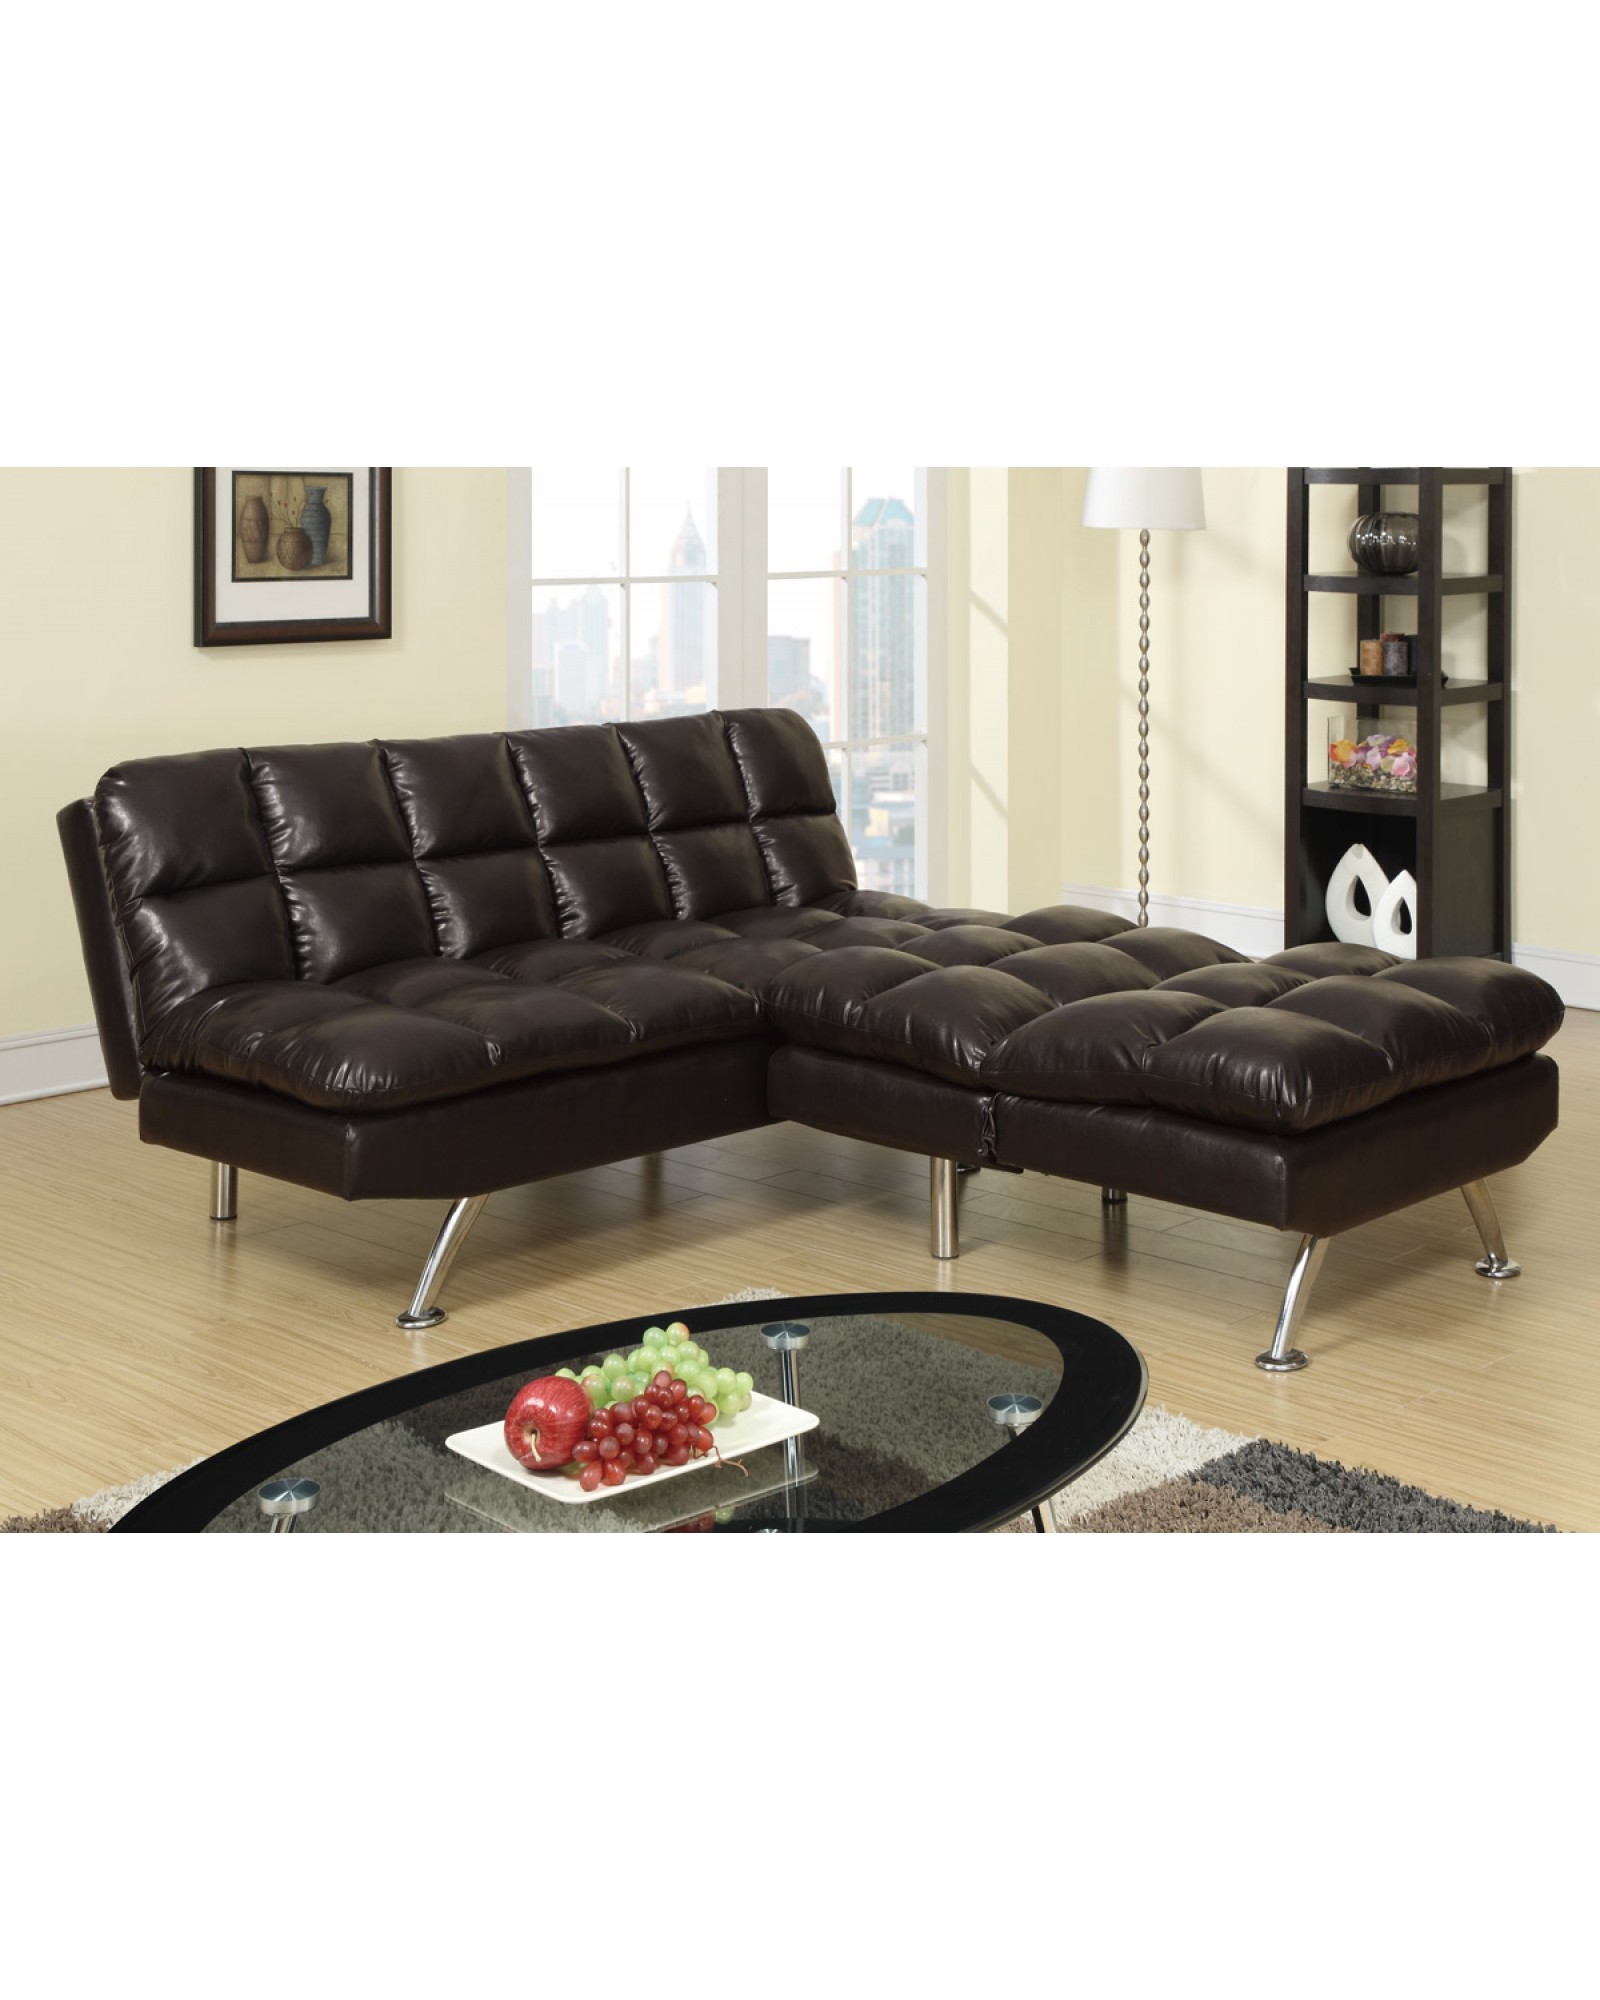 Adjustable Sofa Bed in Espresso Leather by Poundex - F7011